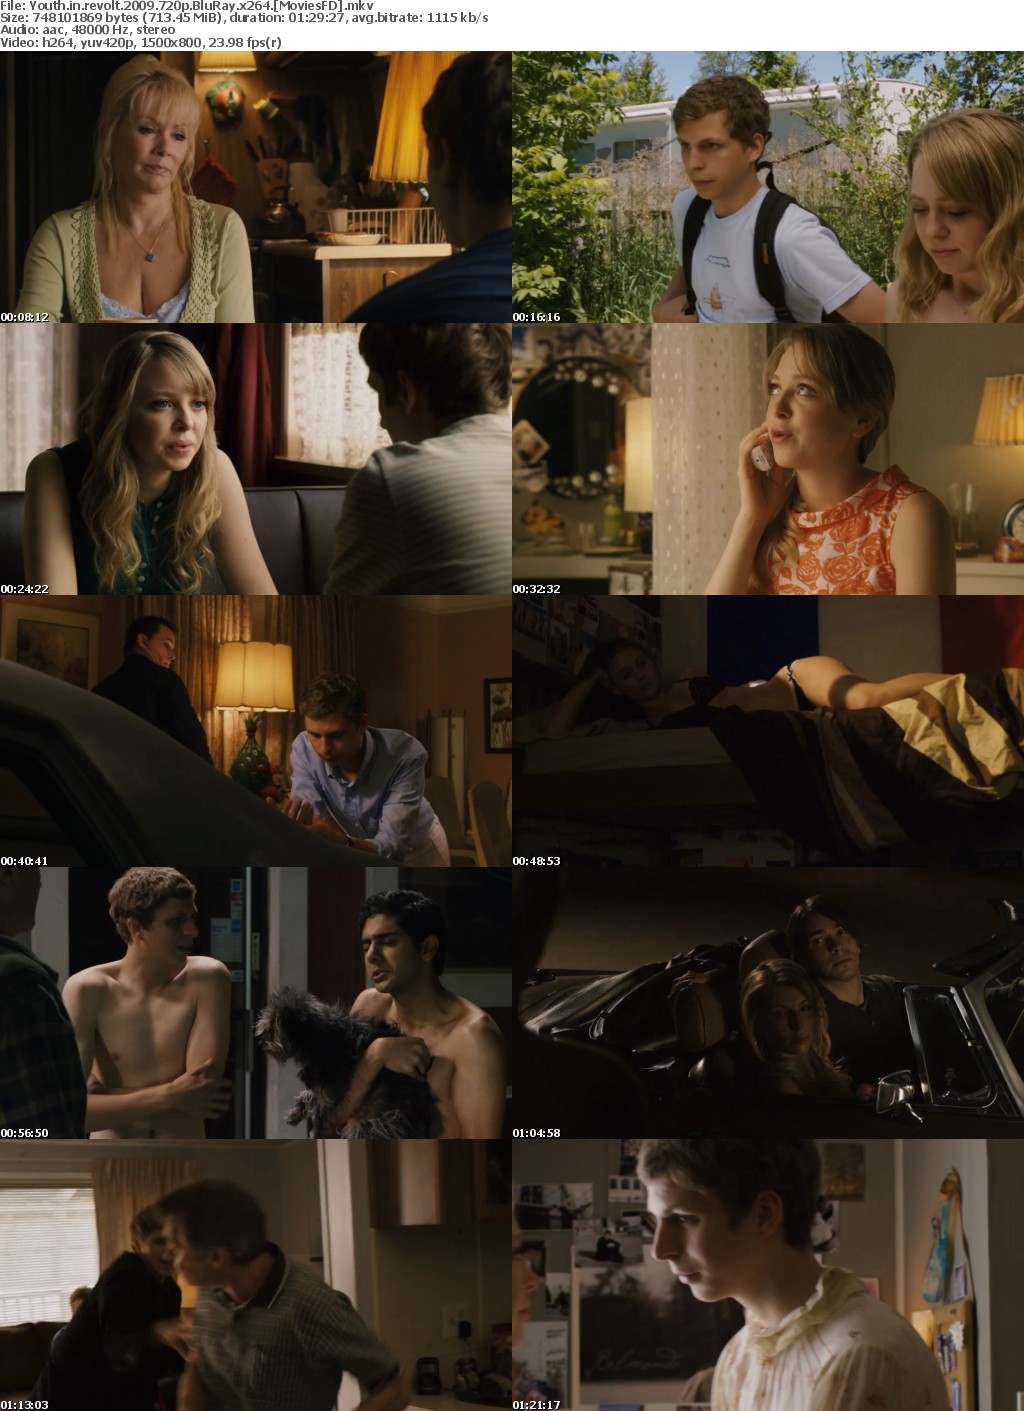 Youth In Revolt (2009) 720p BluRay x264 - MoviesFD